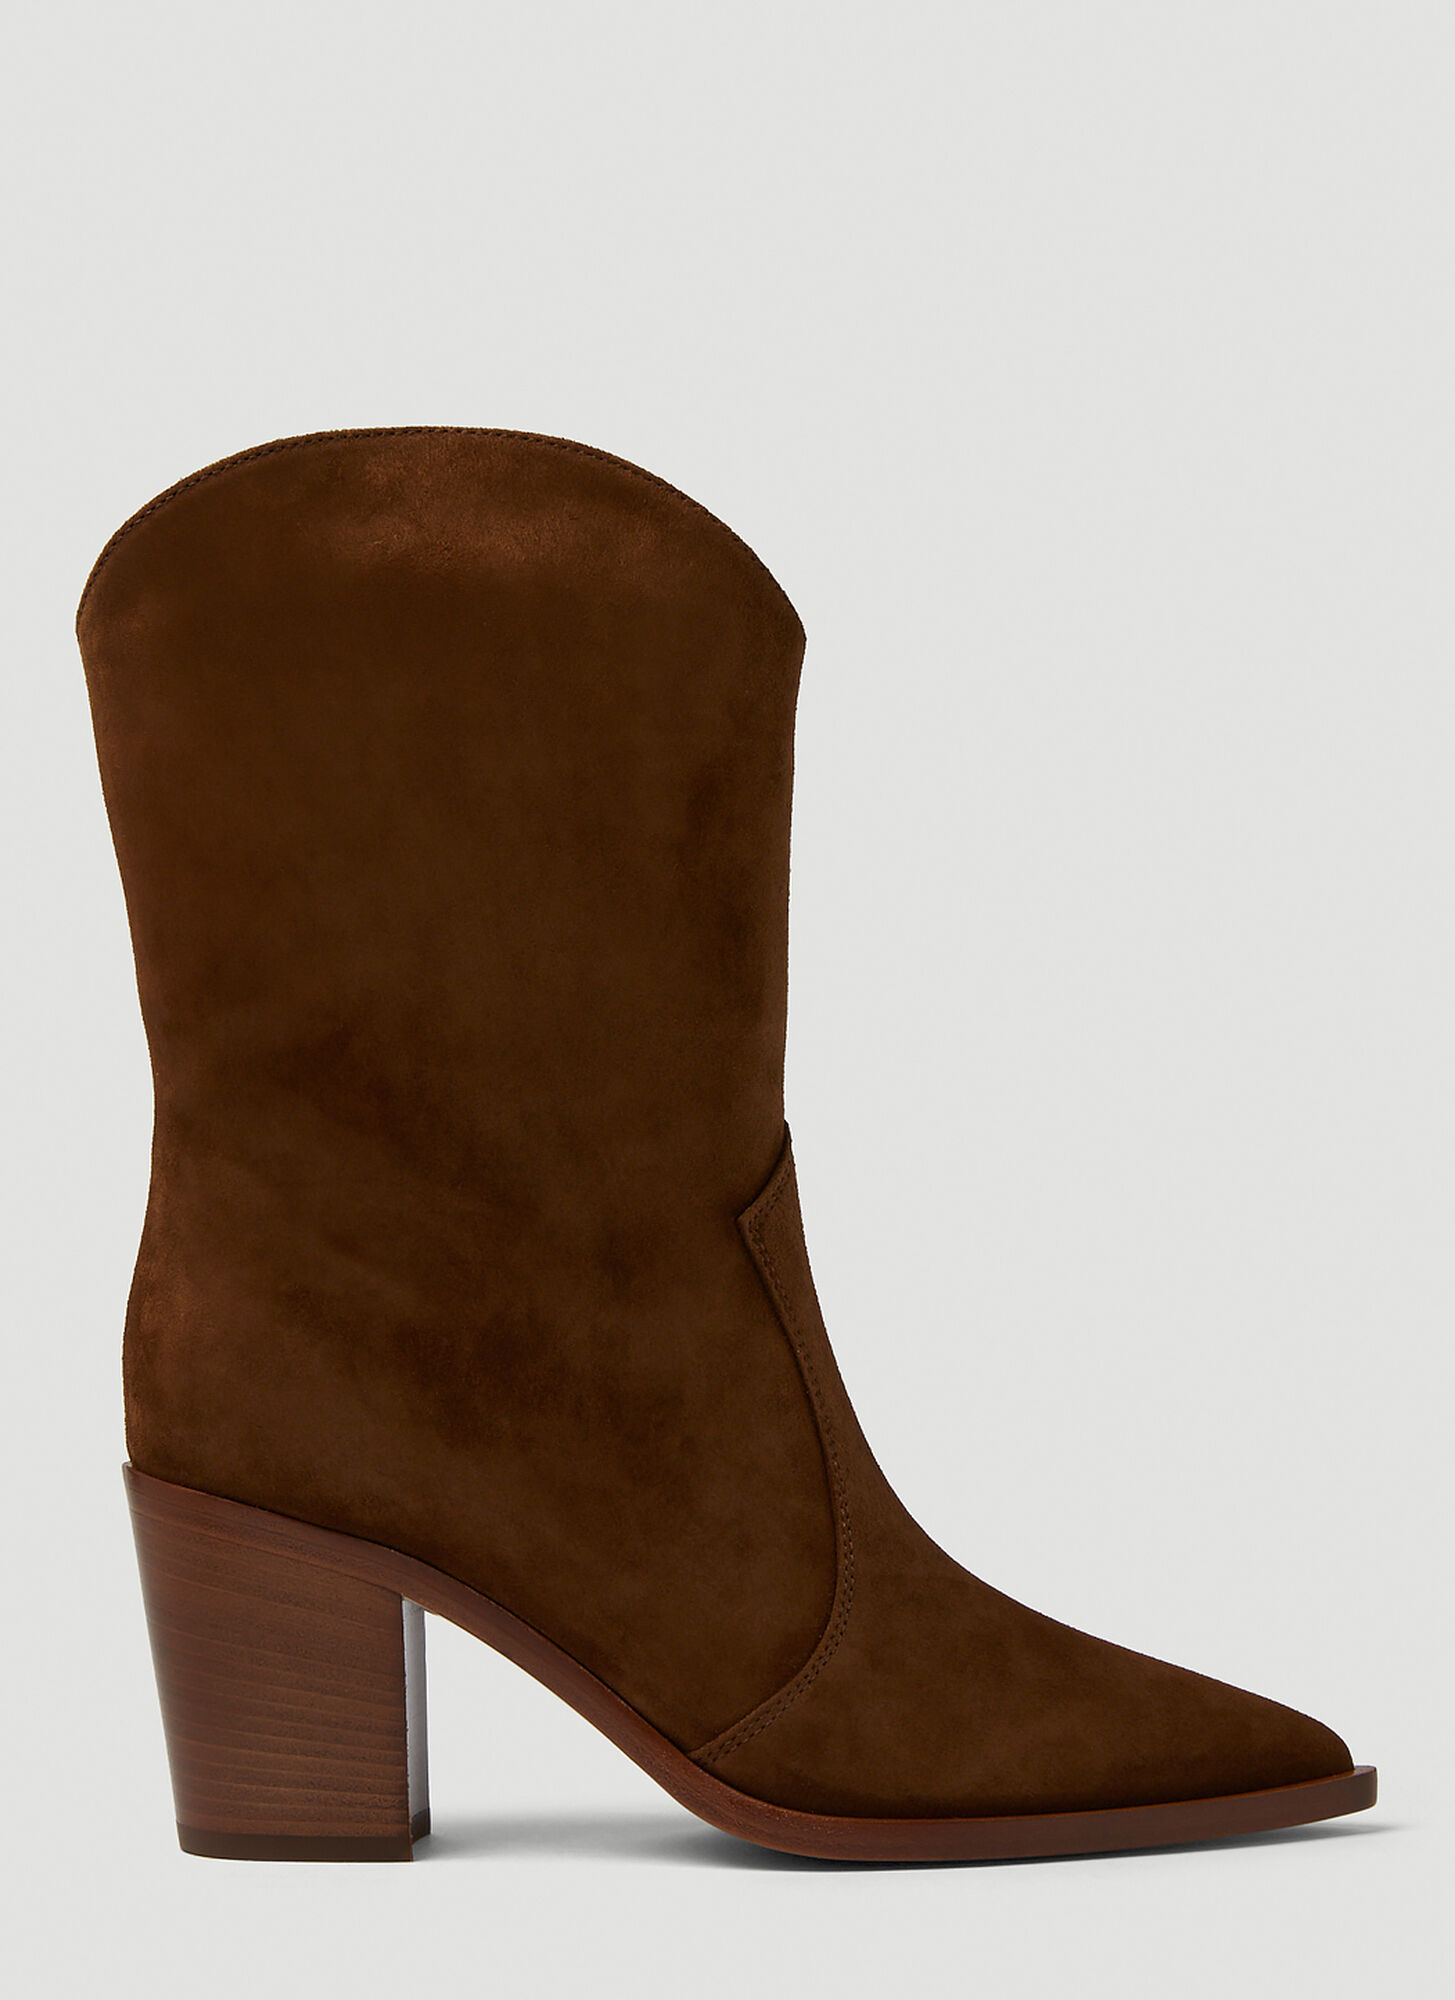 GIANVITO ROSSI DENVER ANKLE BOOTS